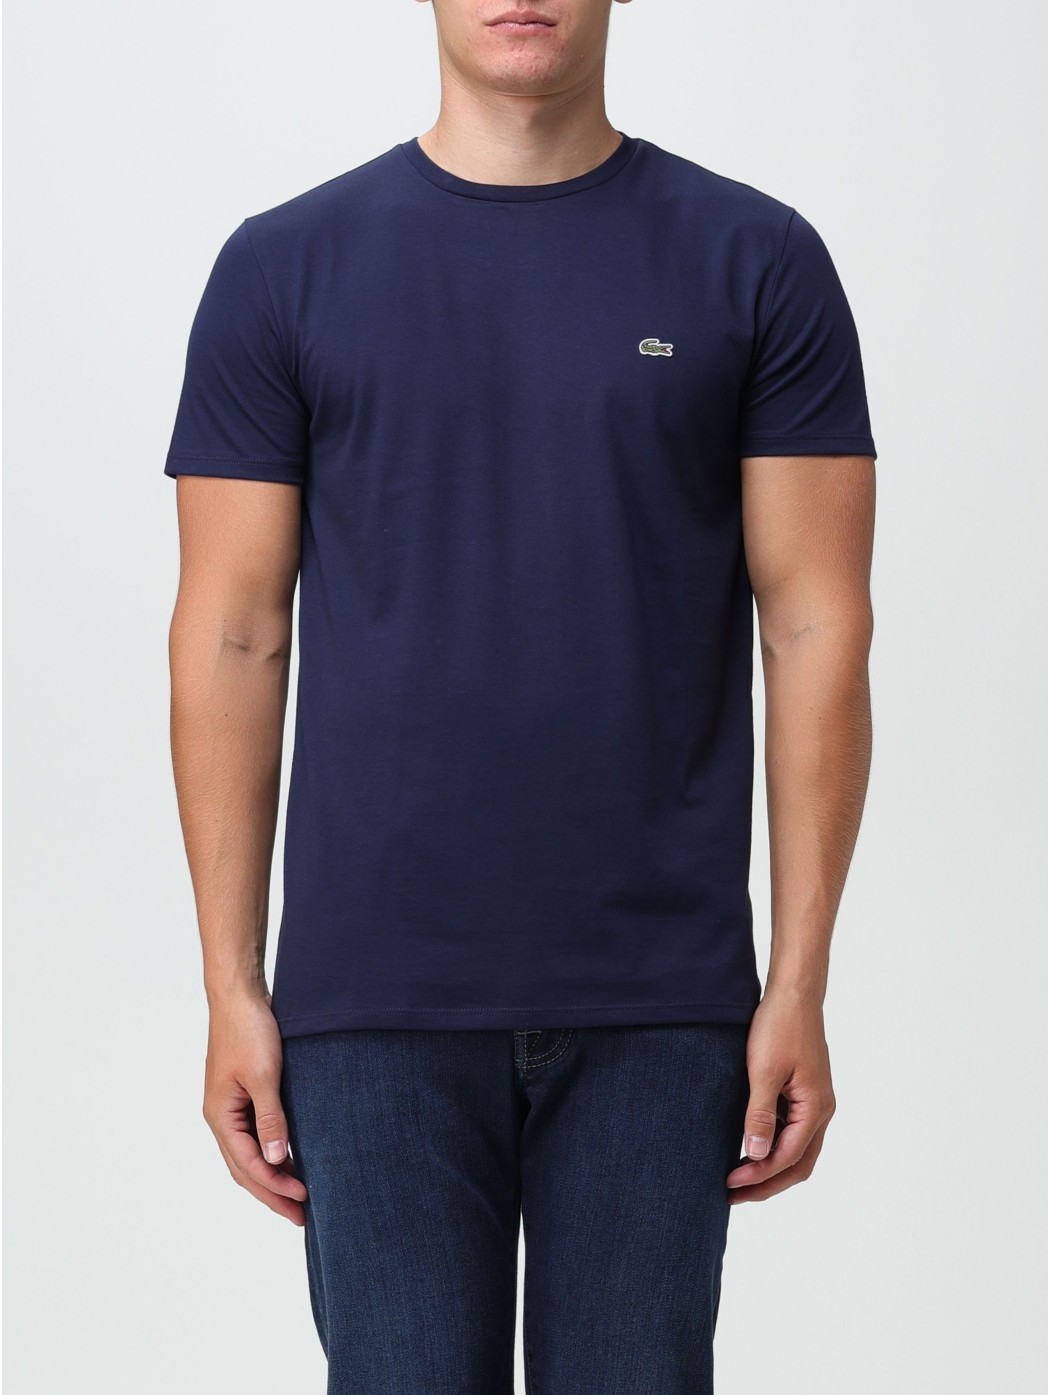 T-SHIRT LACOSTE TH6709 166